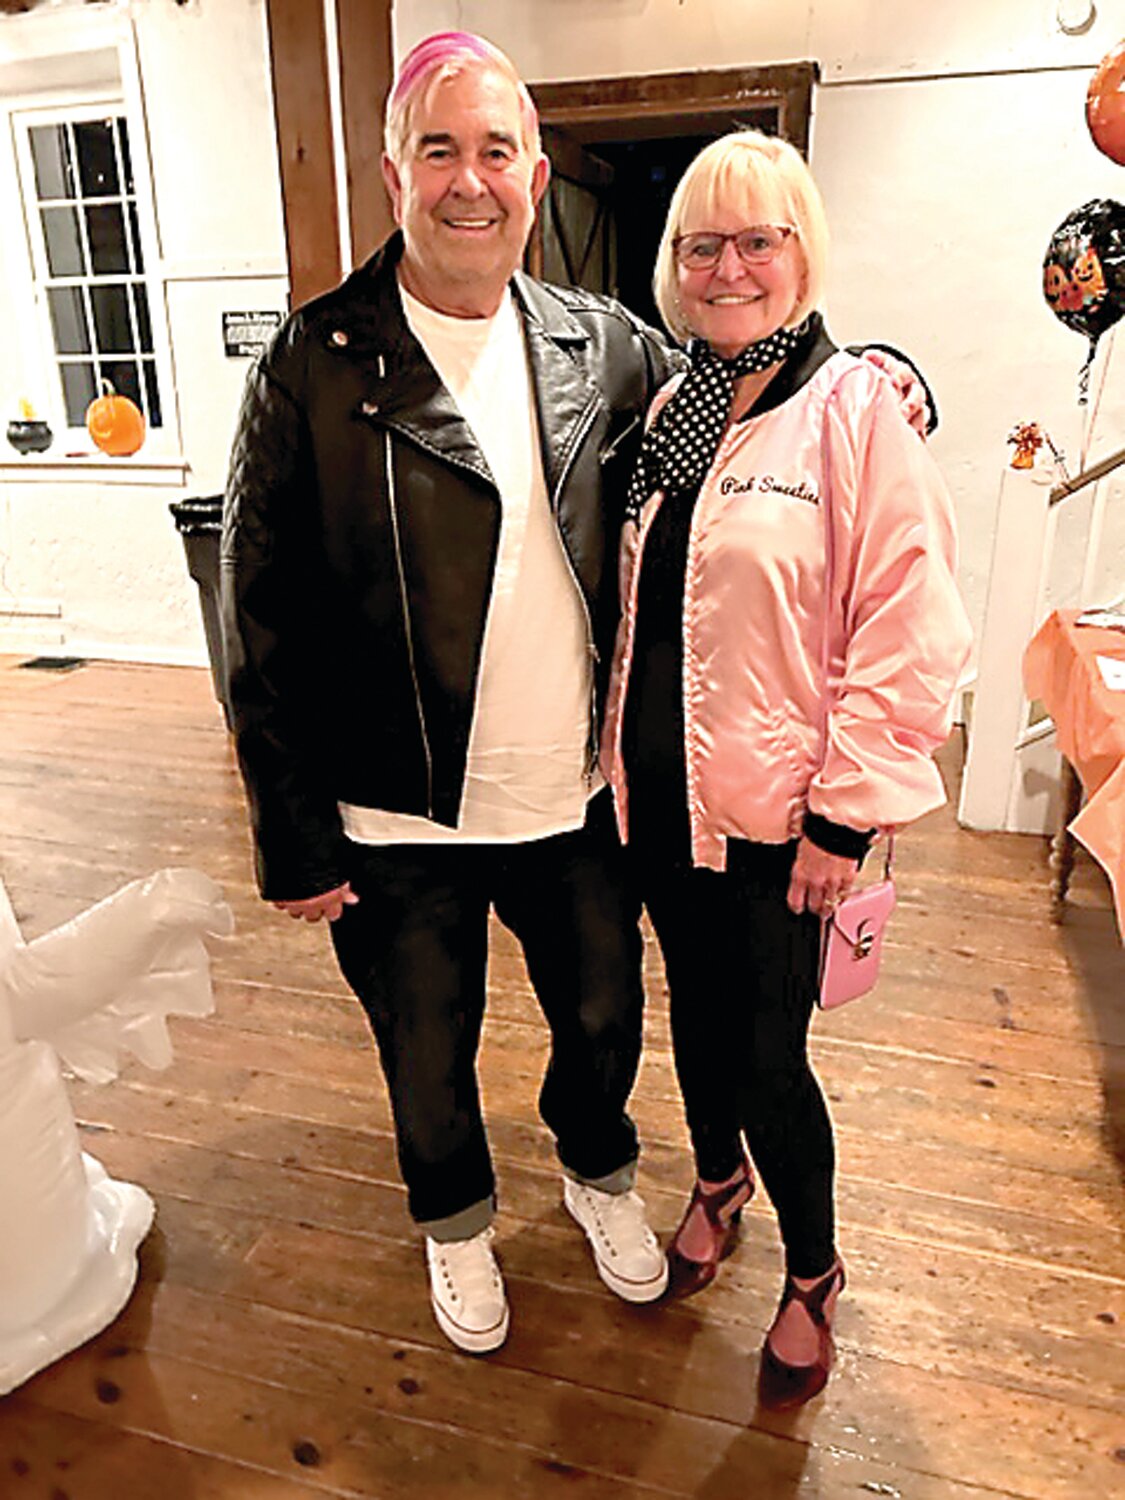 Dudley and Gretchen Rice in their “Grease” costumes.